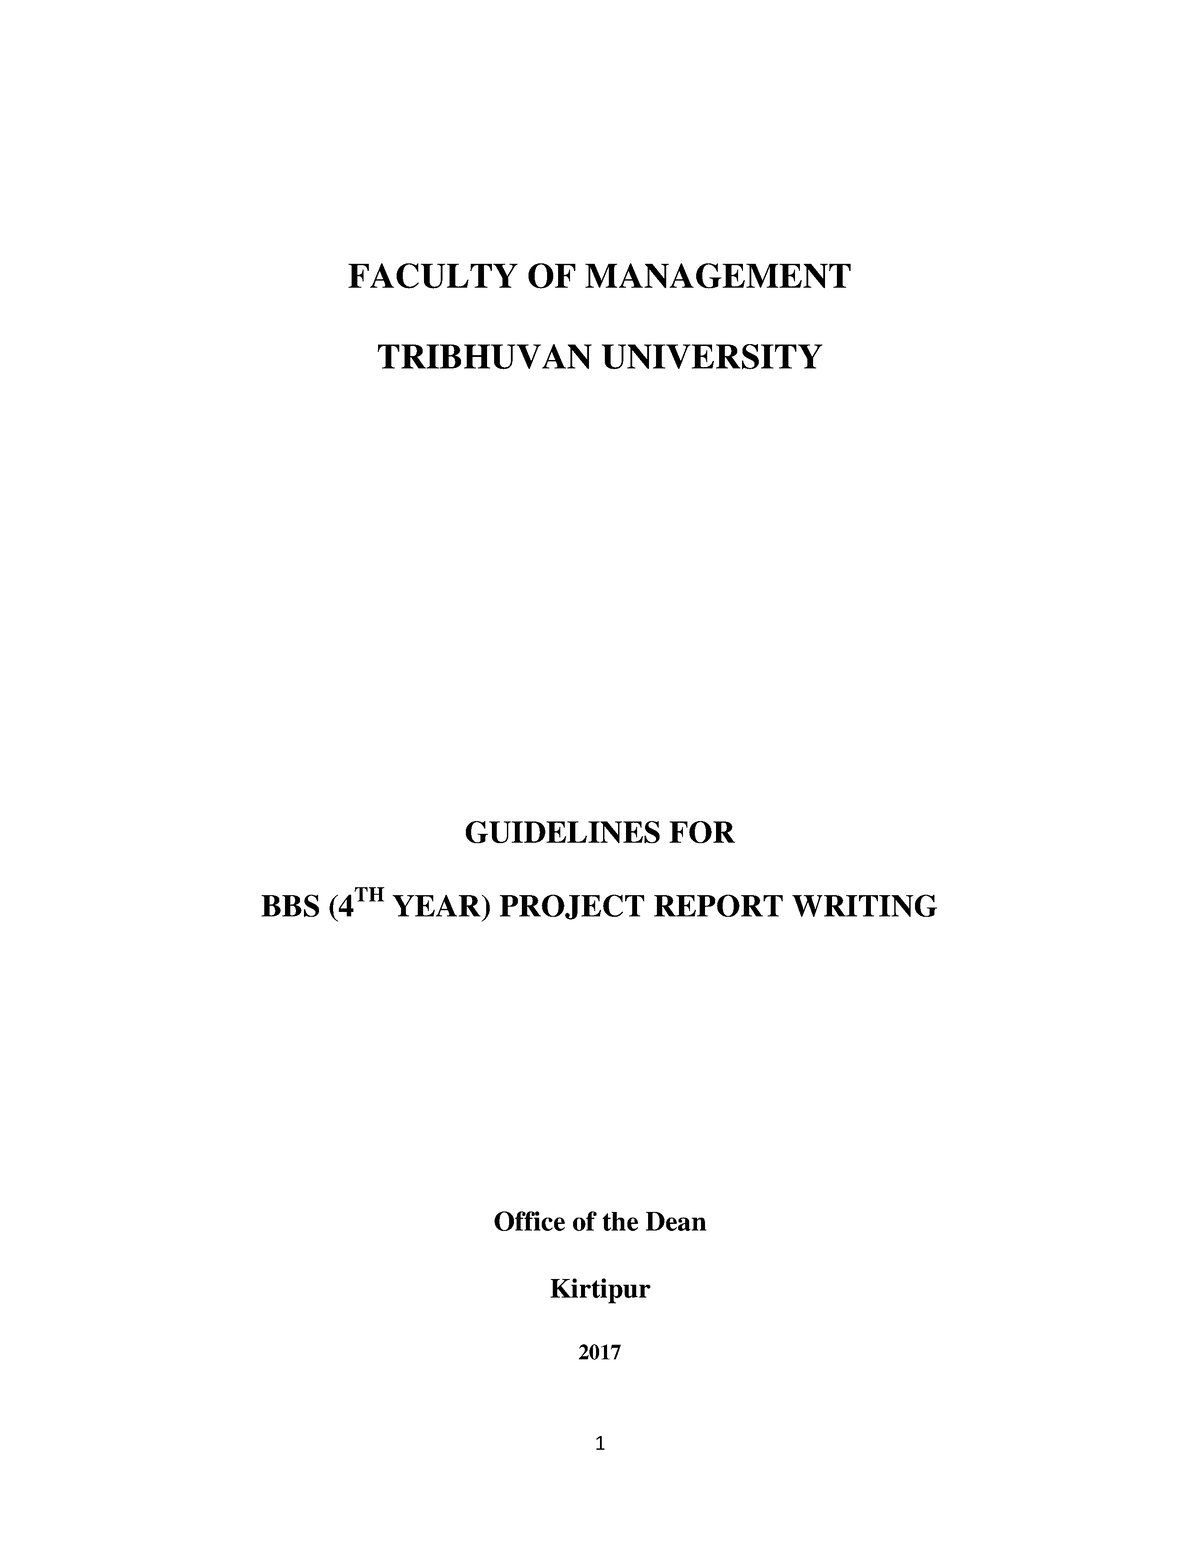 thesis bbs 4th year